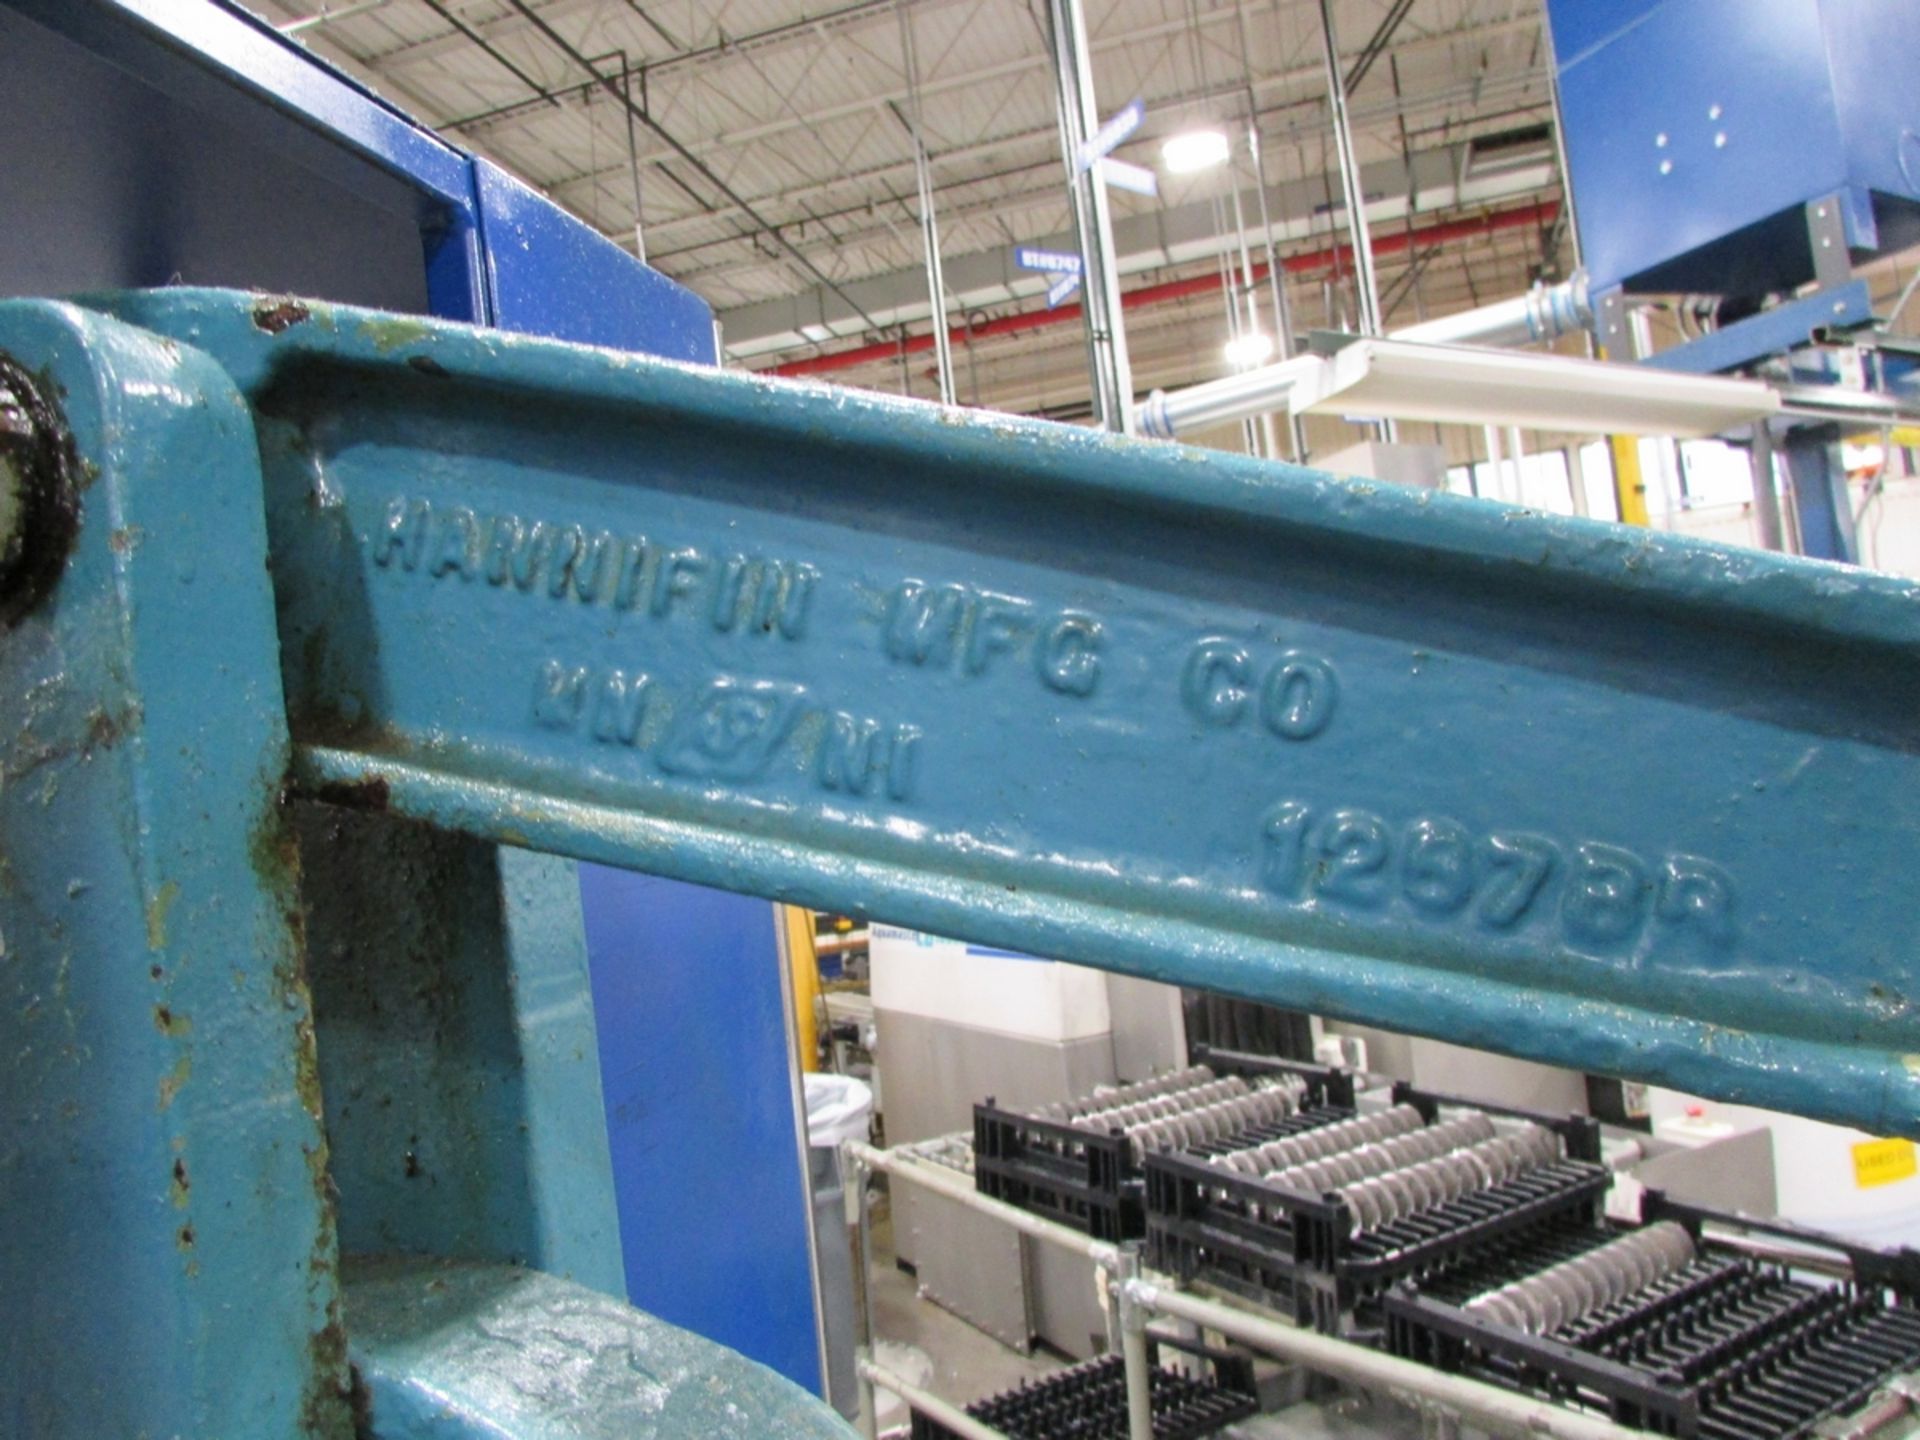 Hannifin B-16 Pneumatic Actuated Arbor Press - Image 8 of 8